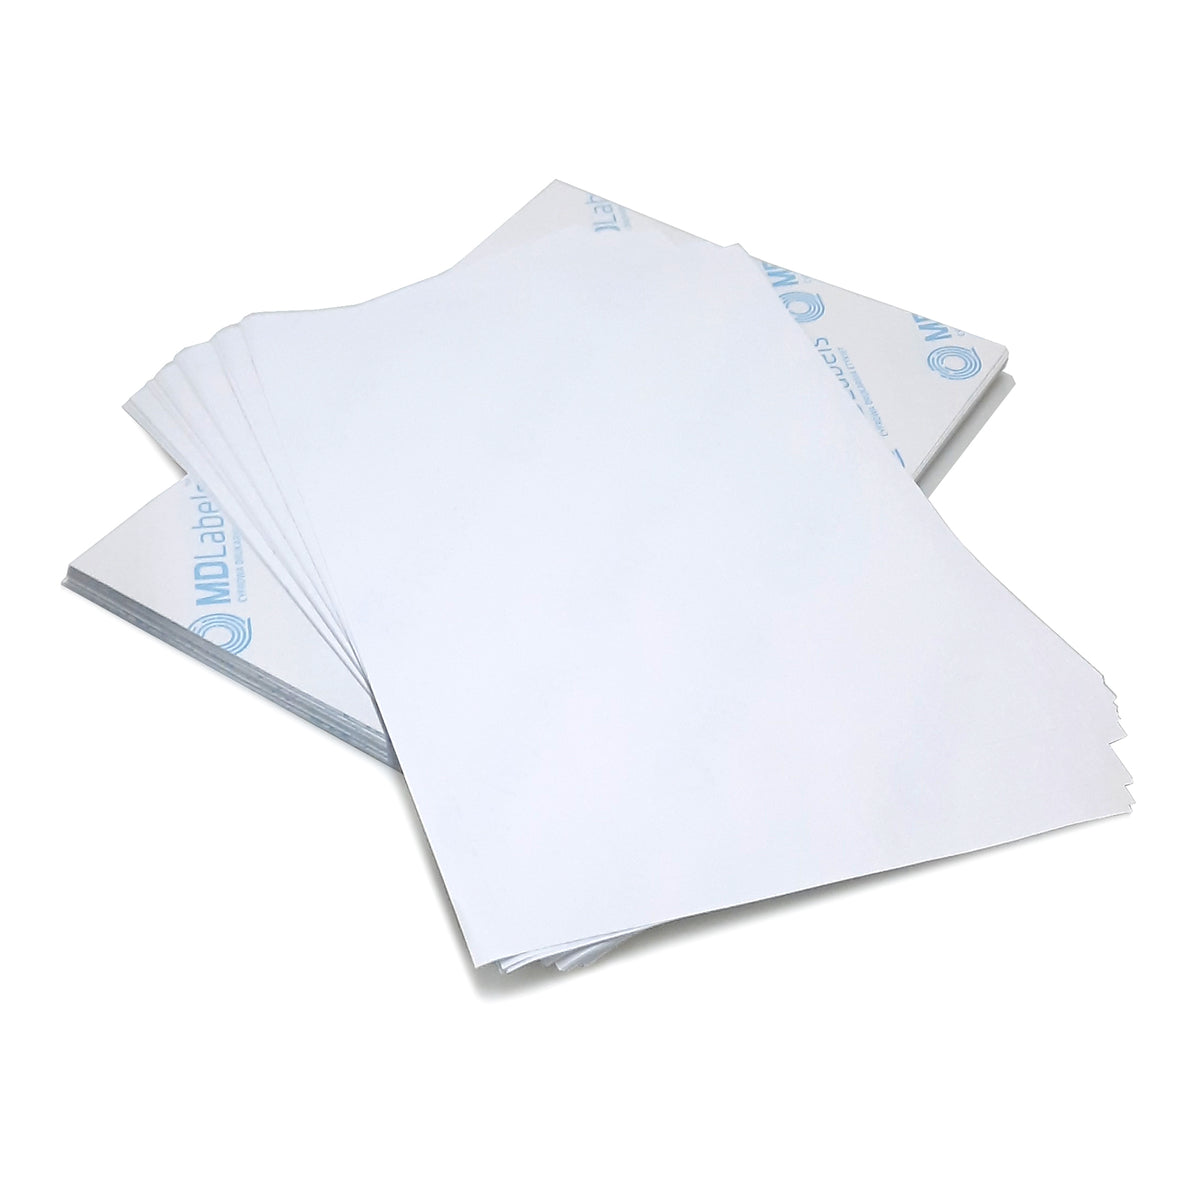 Self-adhesive labels on A4 sheets 38x21,2mm 100 sheets